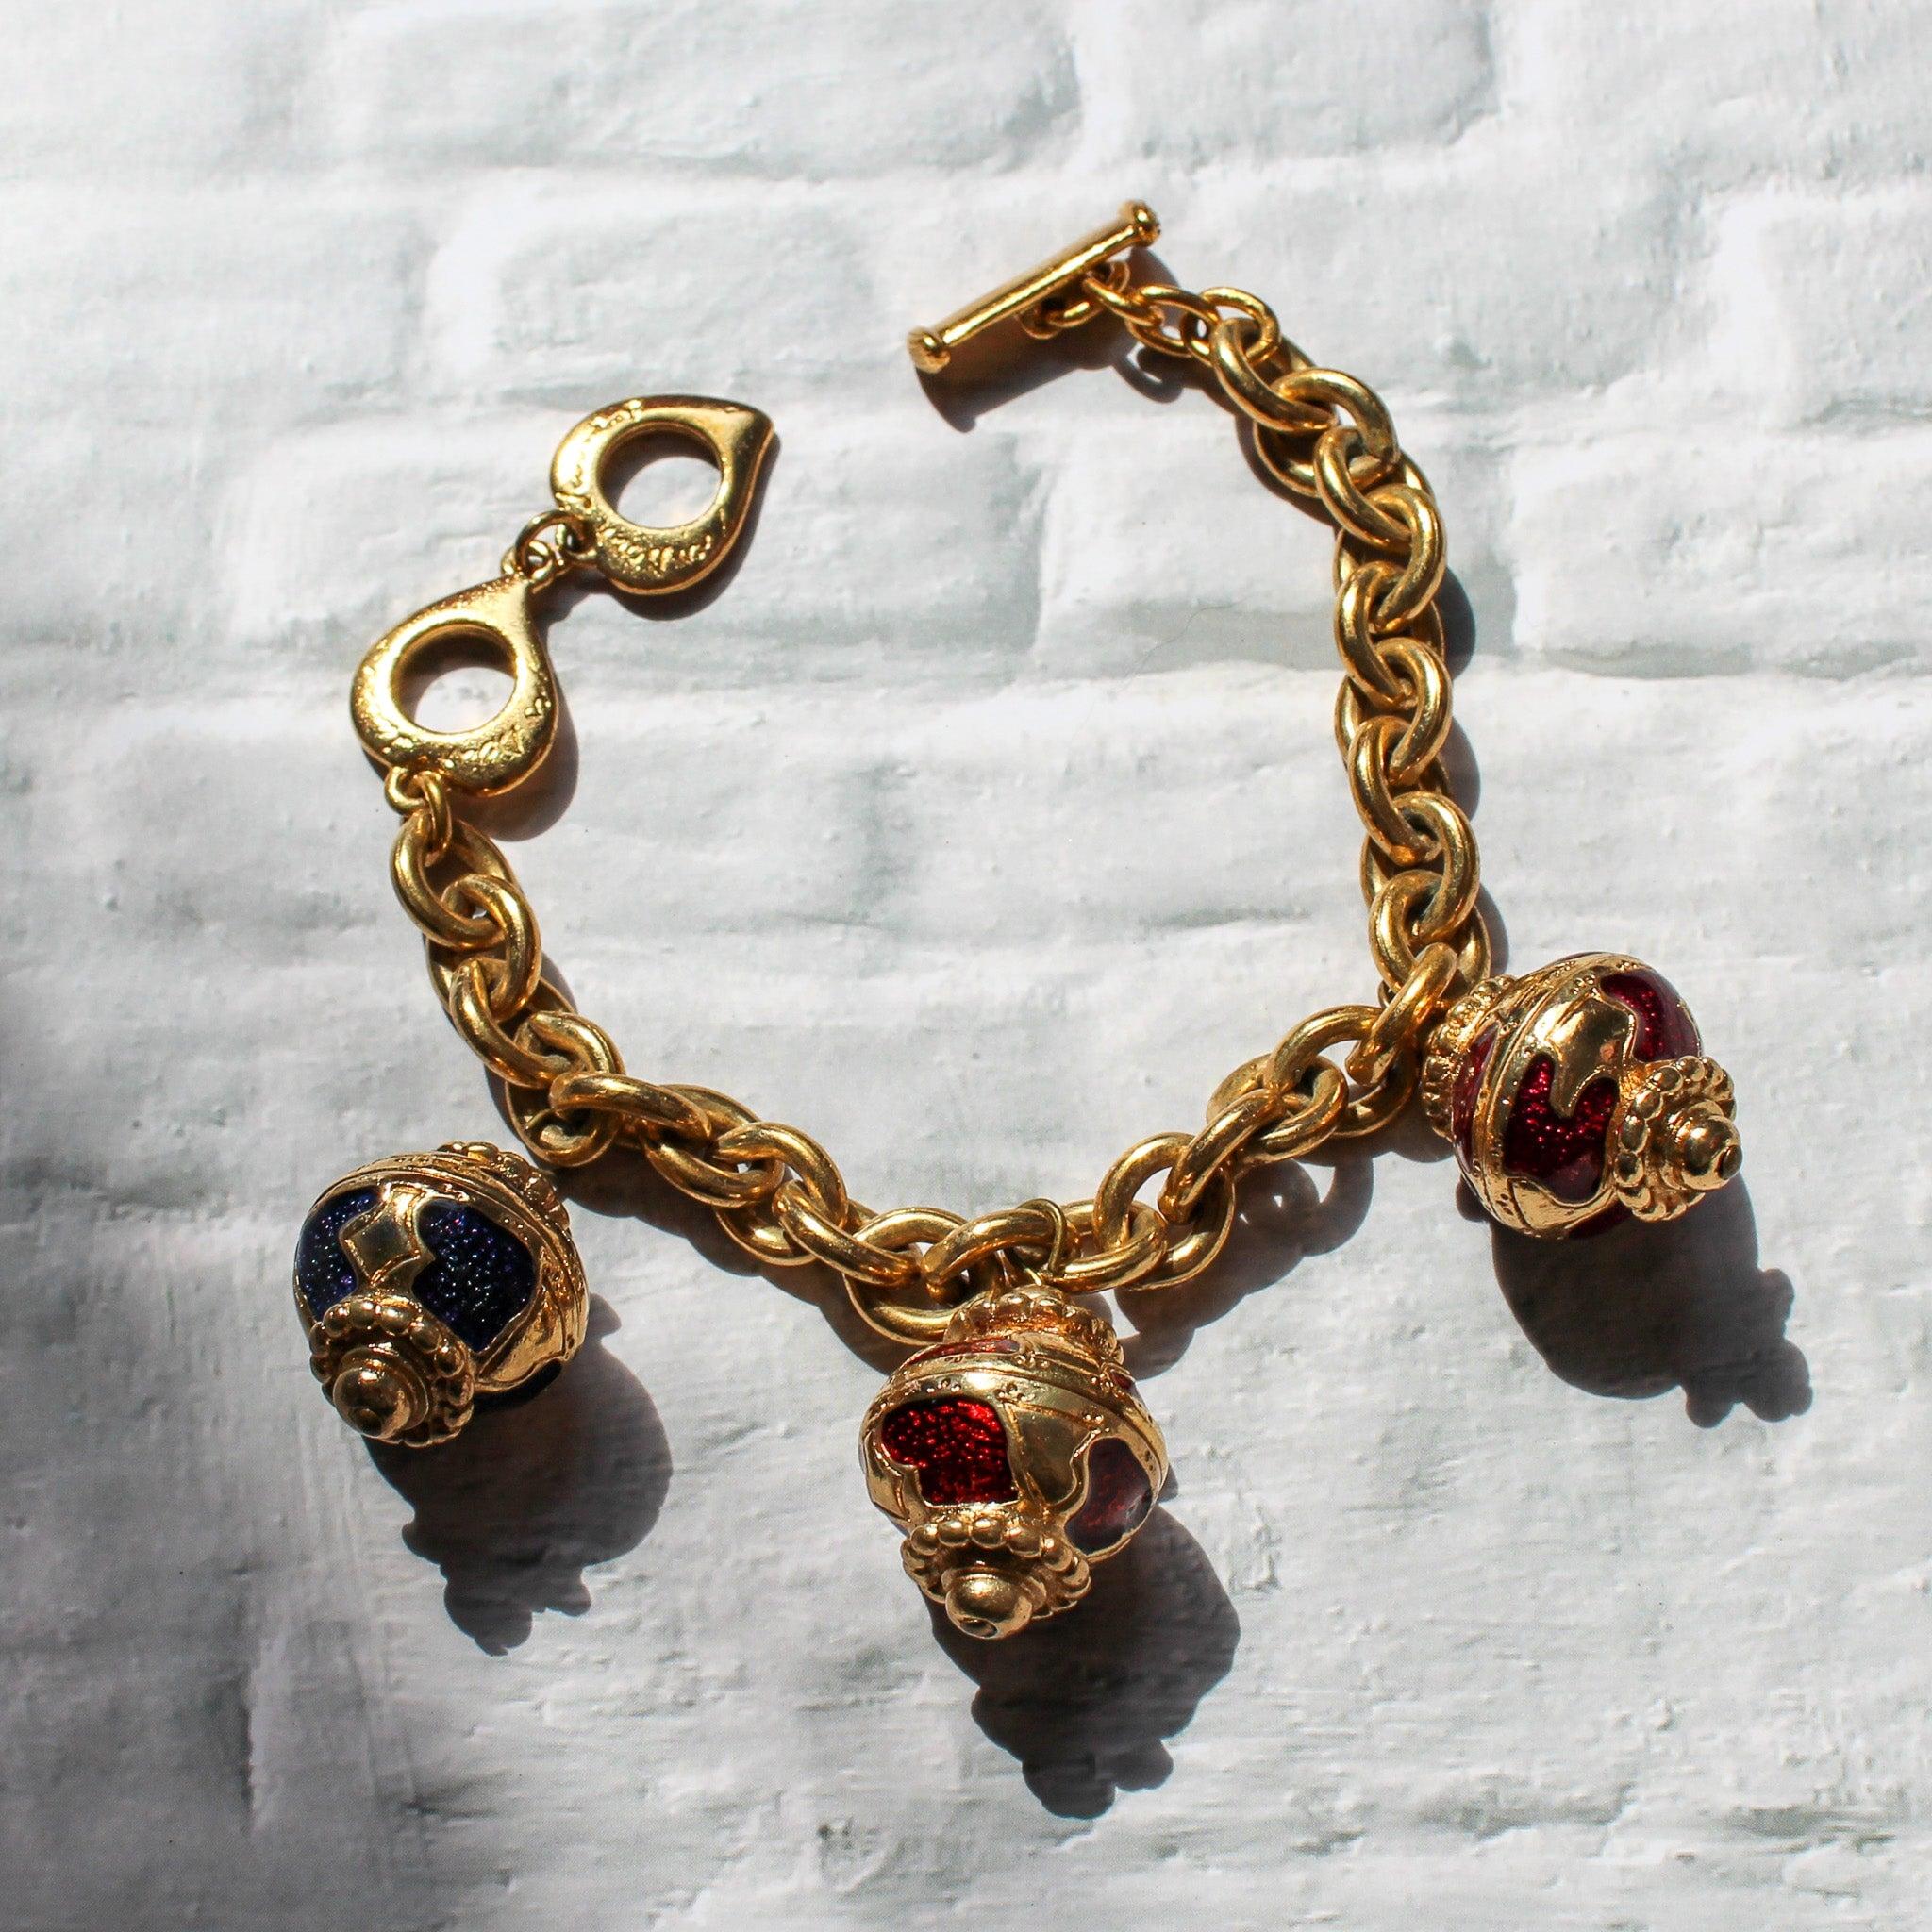 Vintage Yves Saint Laurent 1980s Charm Bracelet 
This YSL 1980s Vintage Charm Bracelet is more than just a beautiful accessory; it's a wearable work of art that pays homage to the unparalleled creativity and innovation of Yves Saint Laurent. 